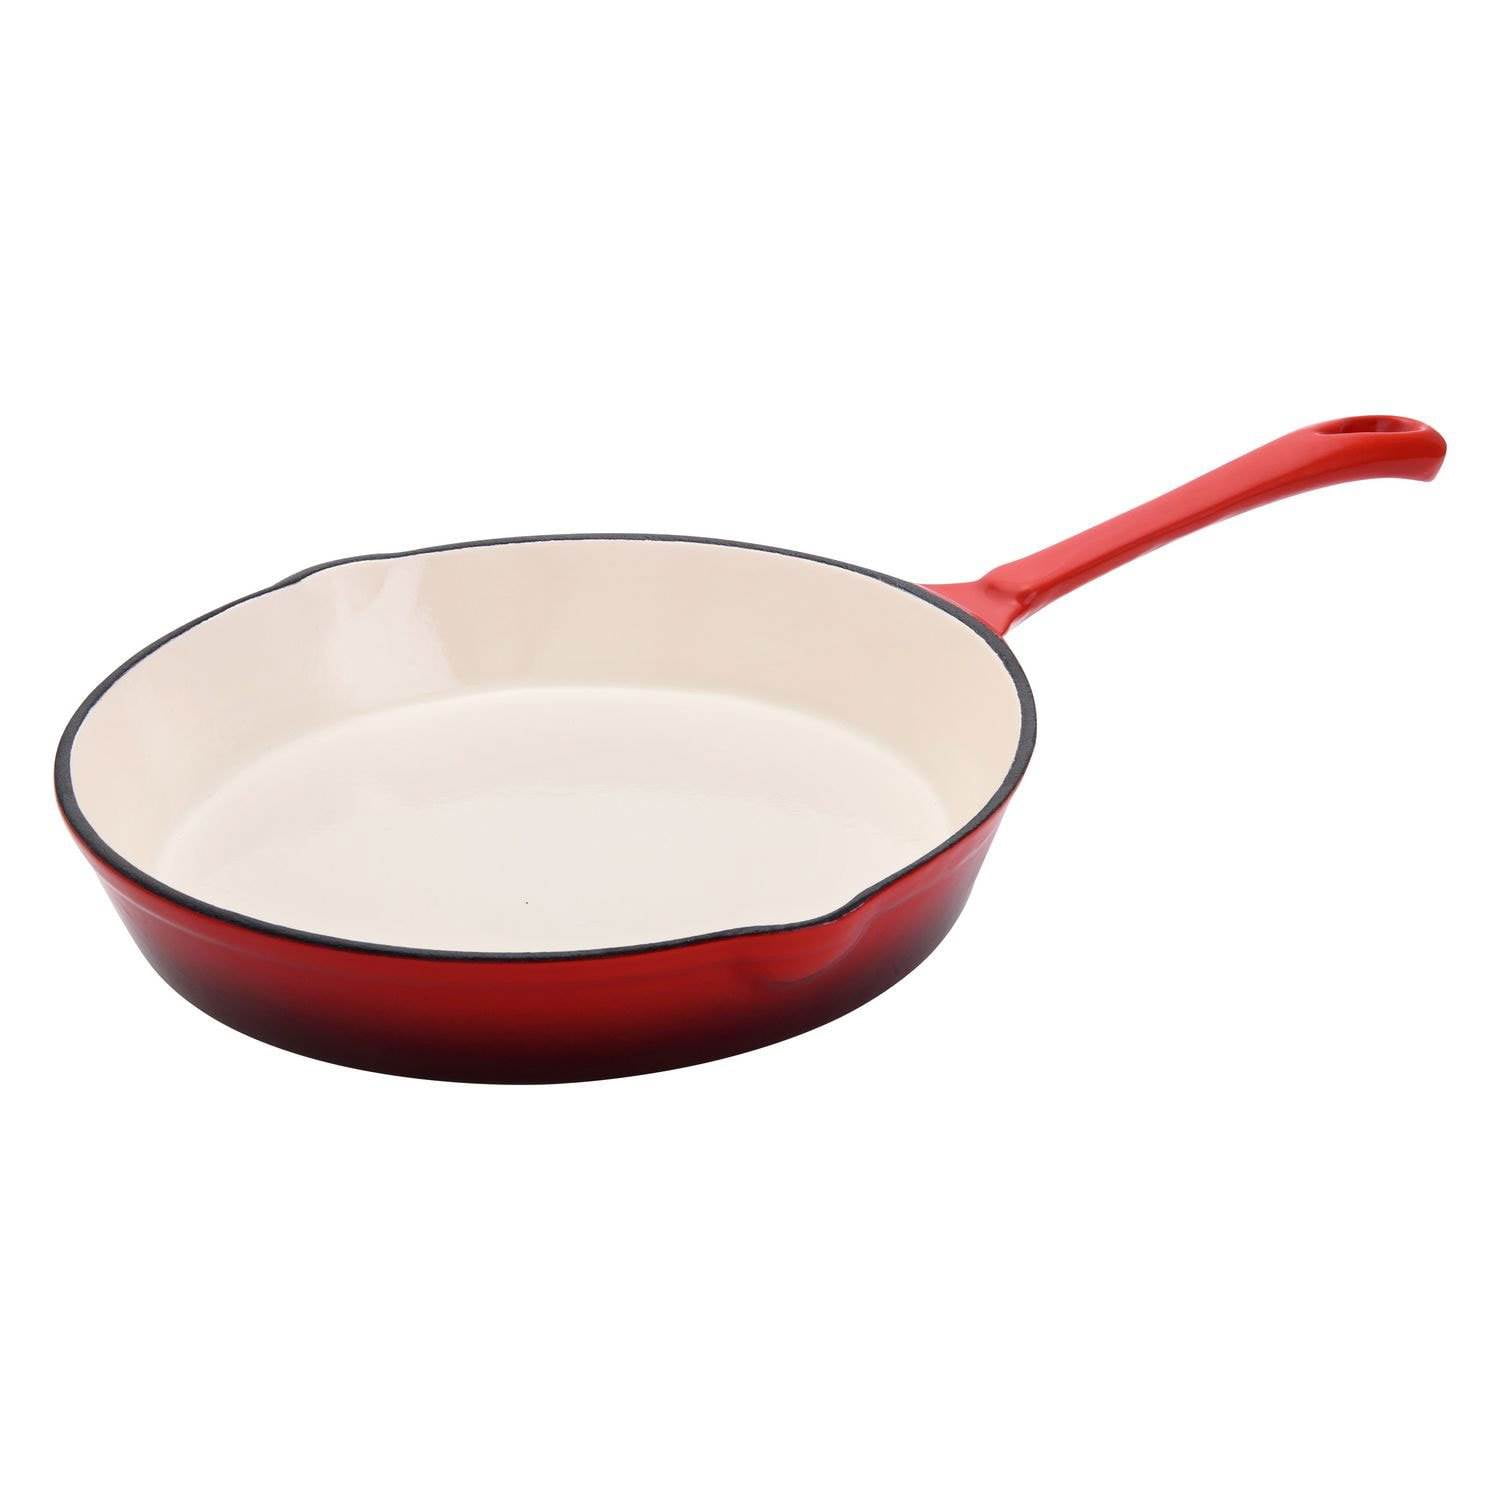 Hamilton Beach 12 Inch Enameled Coated Solid Cast Iron Frying Pan Skillet,  Red